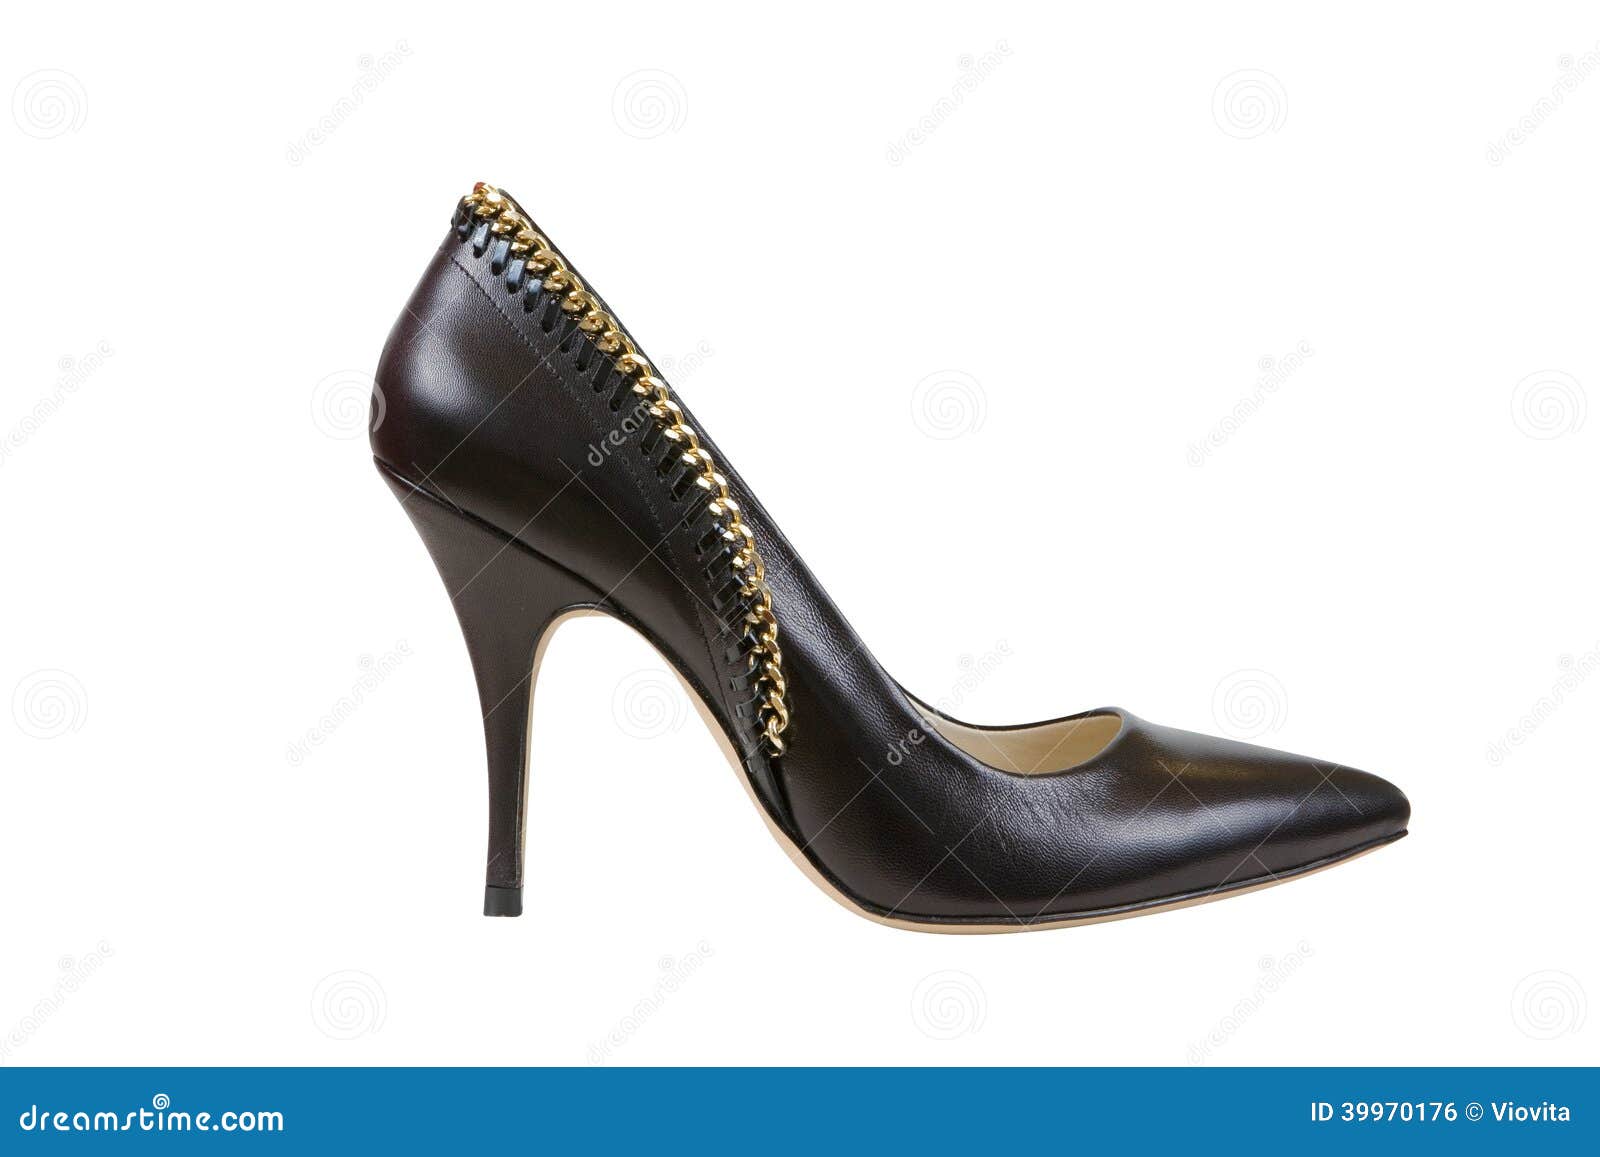 Black high heeled shoes stock photo. Image of high, spikes - 39970176